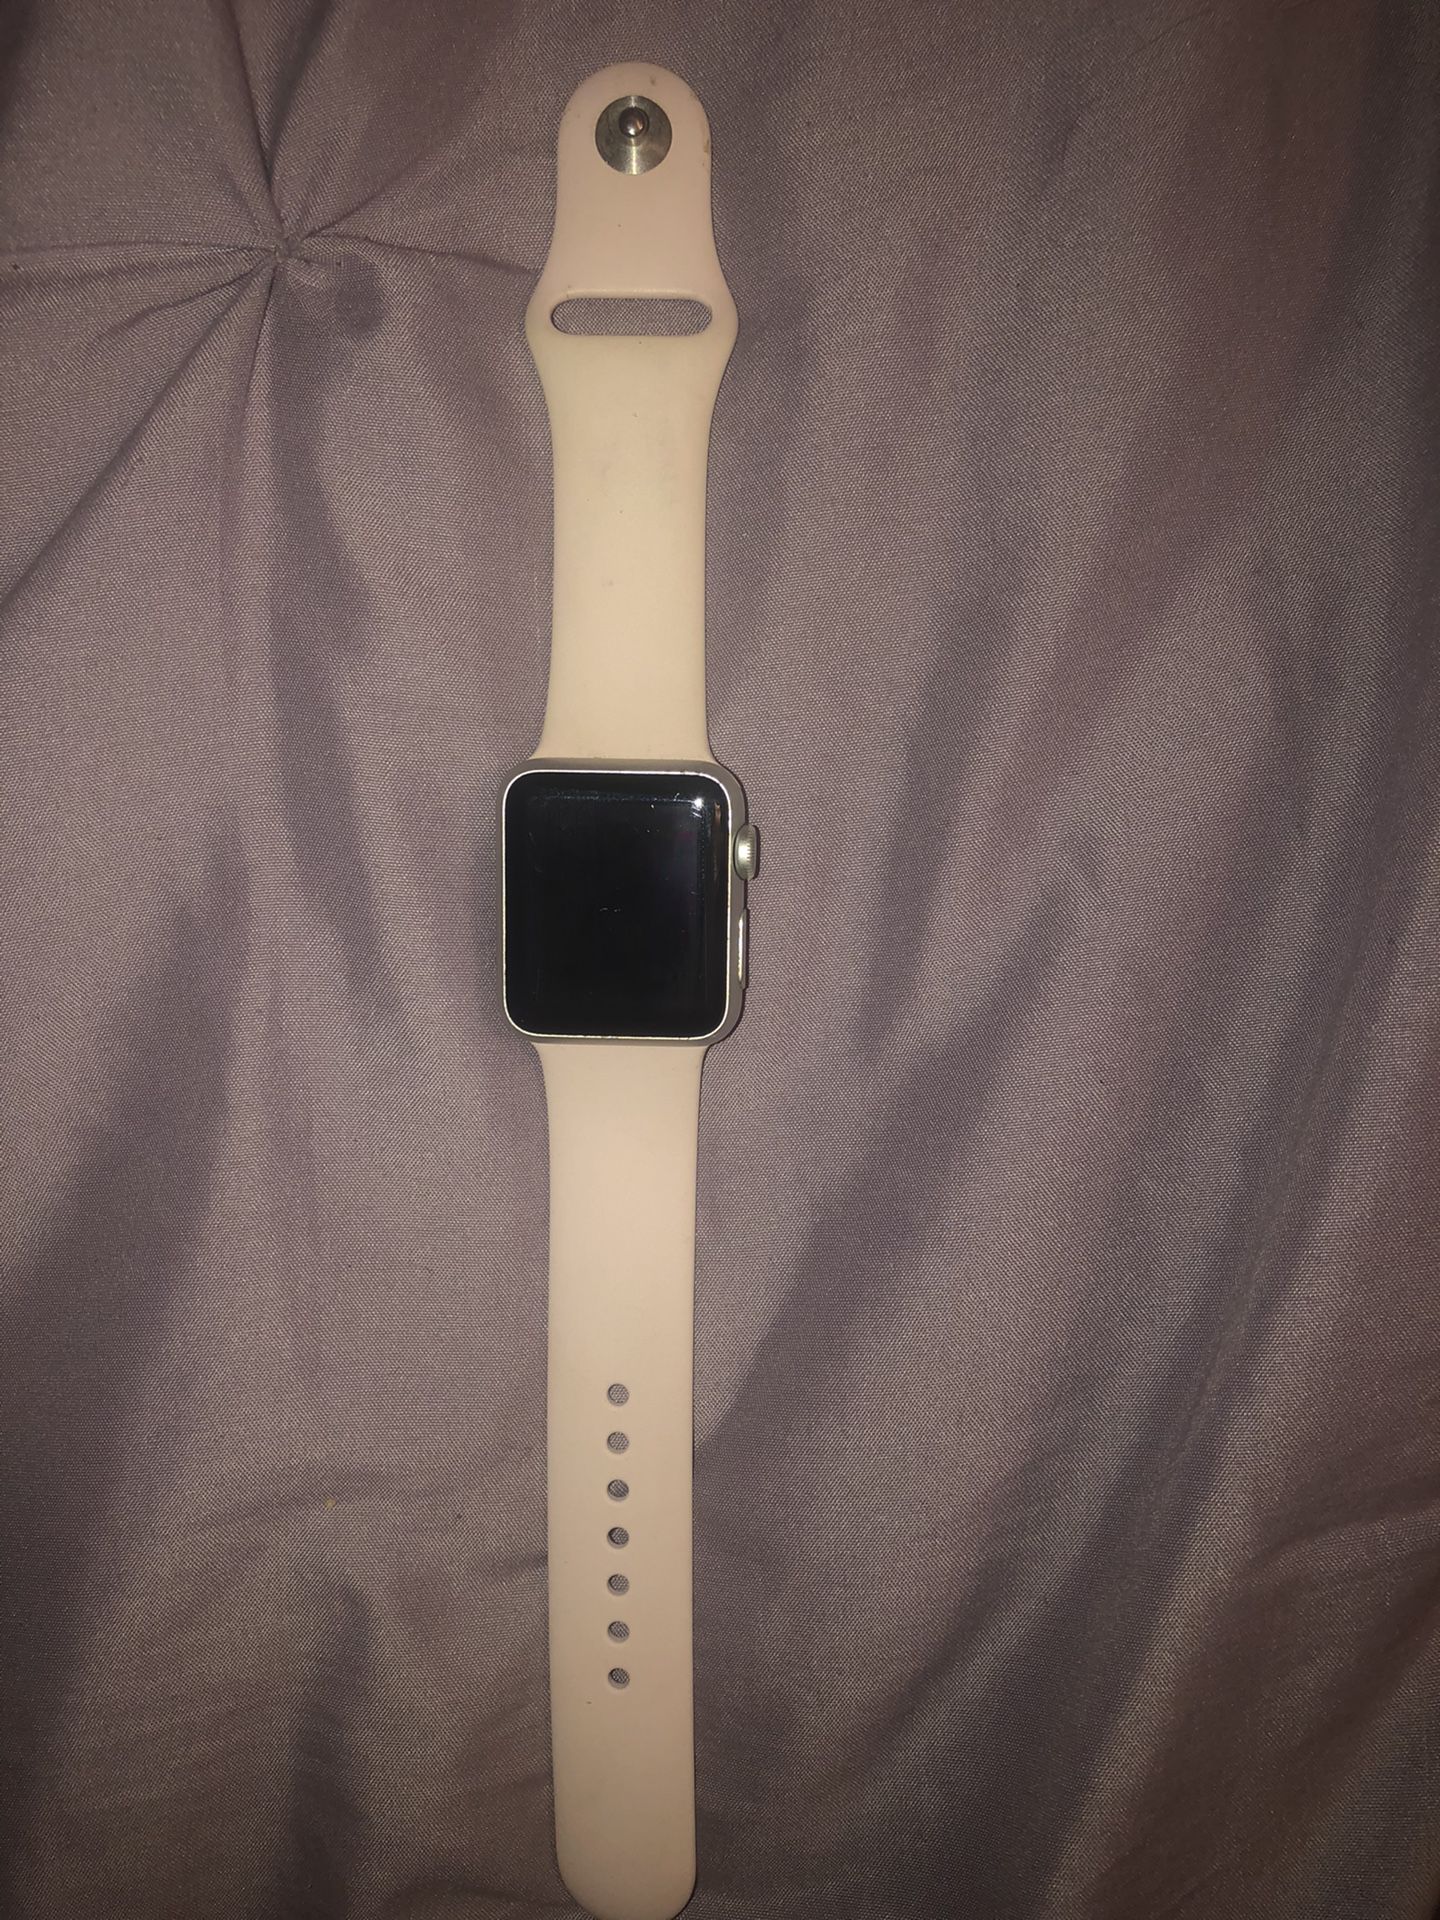 Apple Watch series 1 with both pink and white band and charger